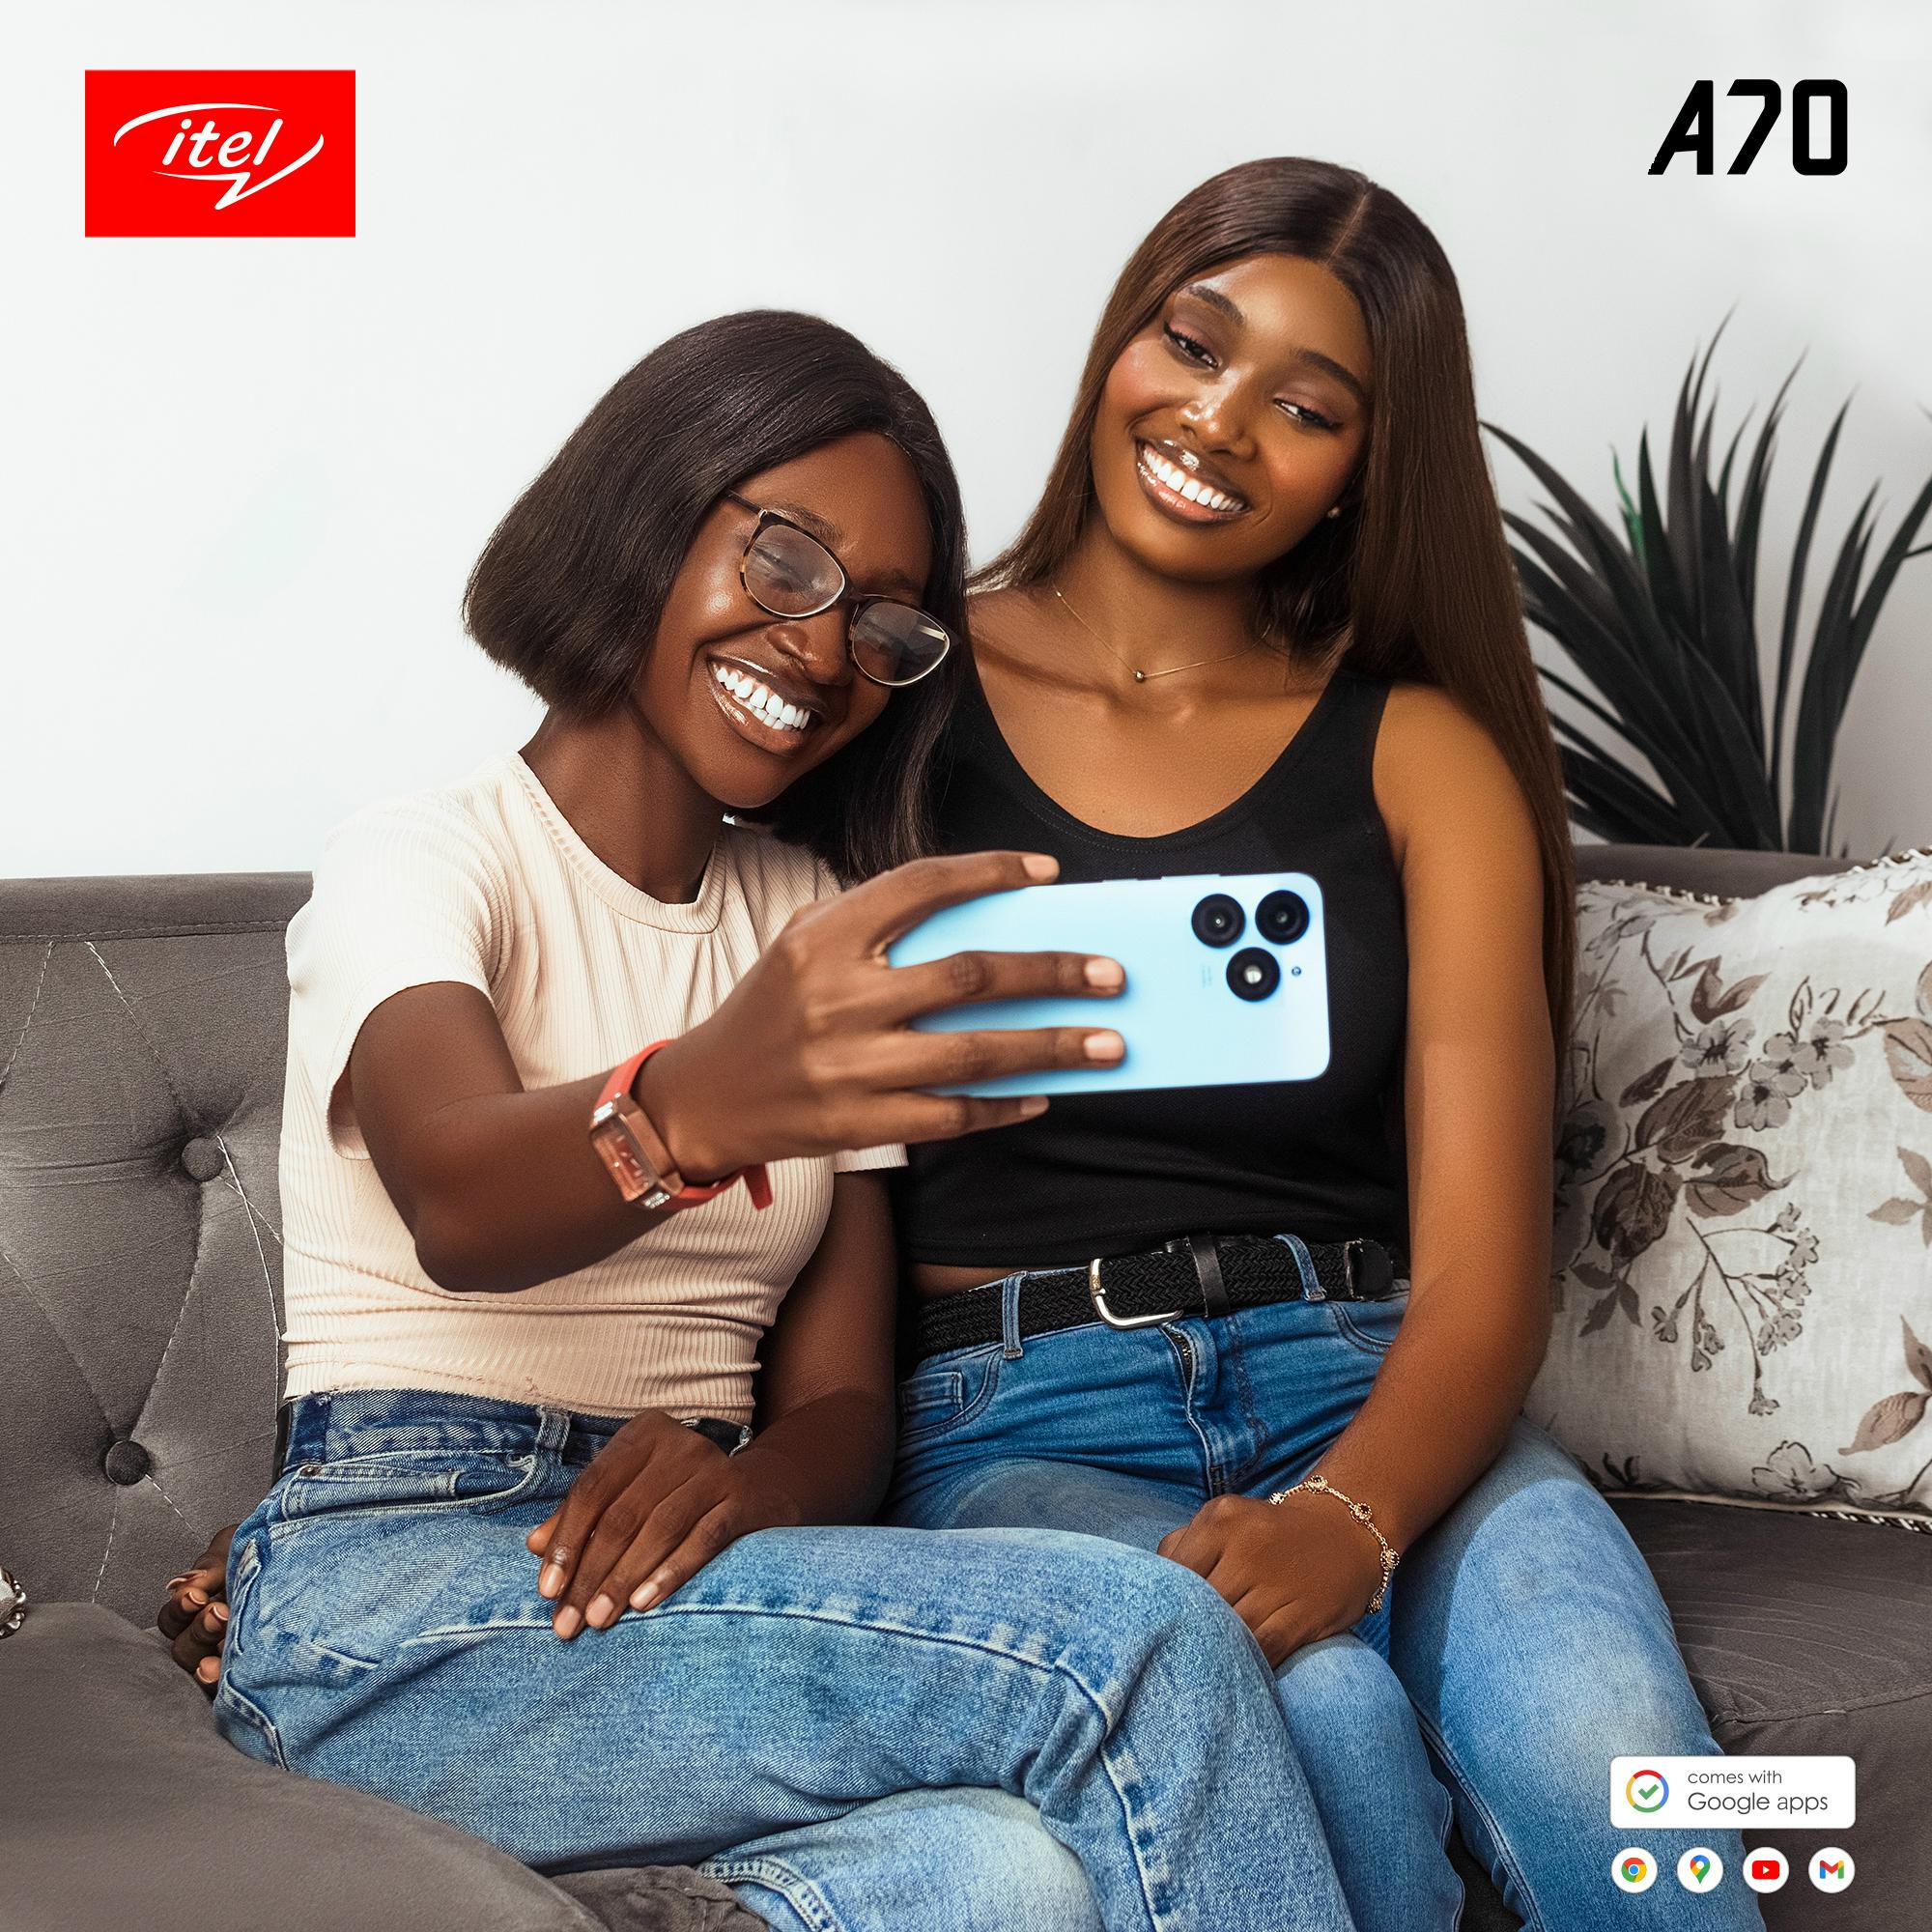 The itel A70 Is Affordable, Reliable, and Stylish. Here’s Why